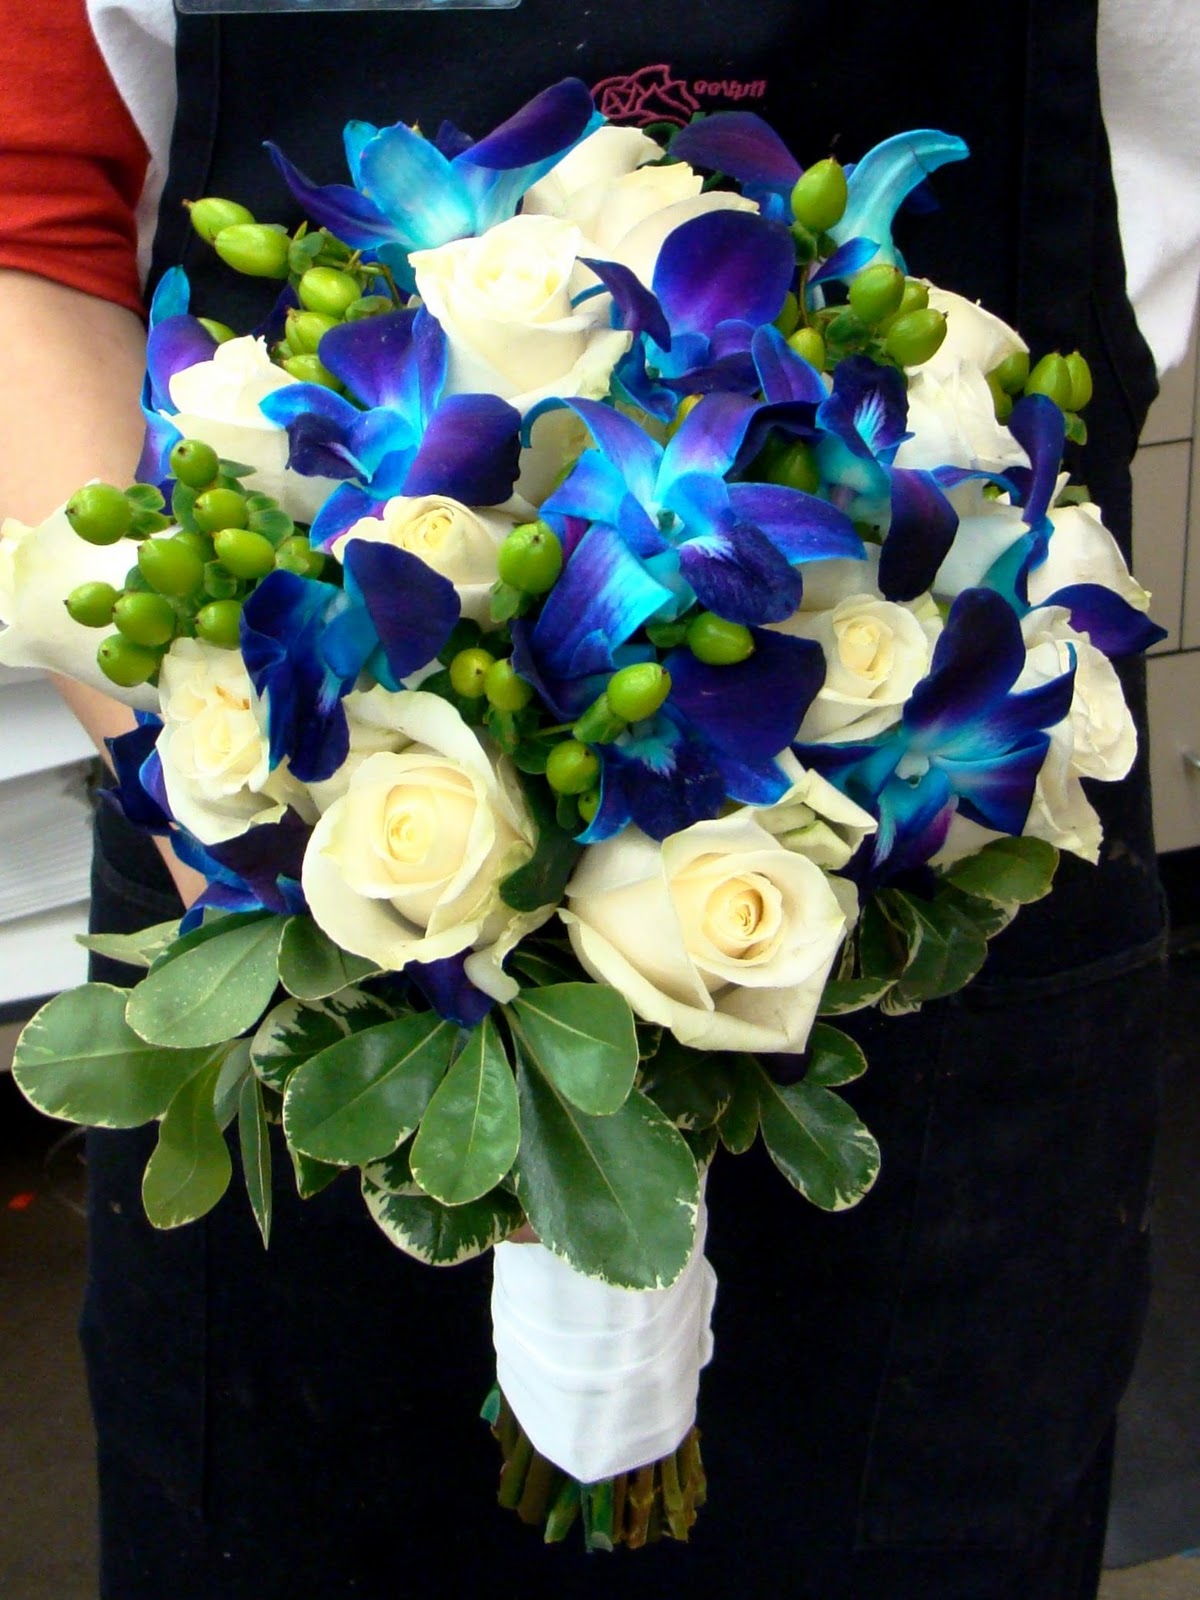 This was the bridal bouquet.